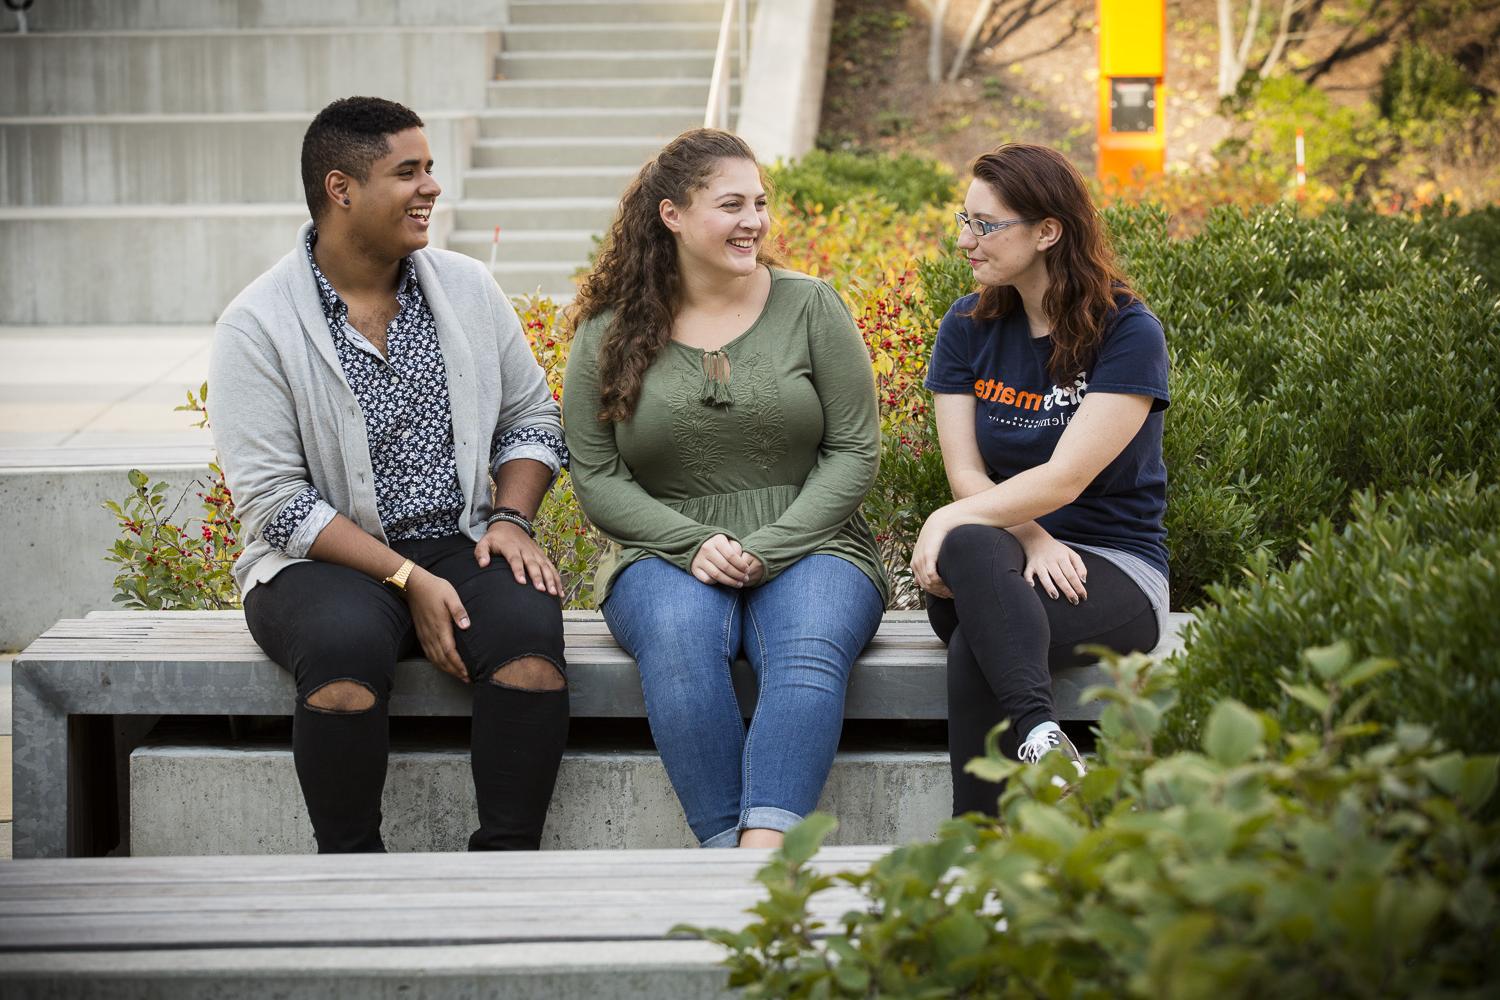 Accepted Students Day 2019 at Salem State University, Sunday, March 31, 2019